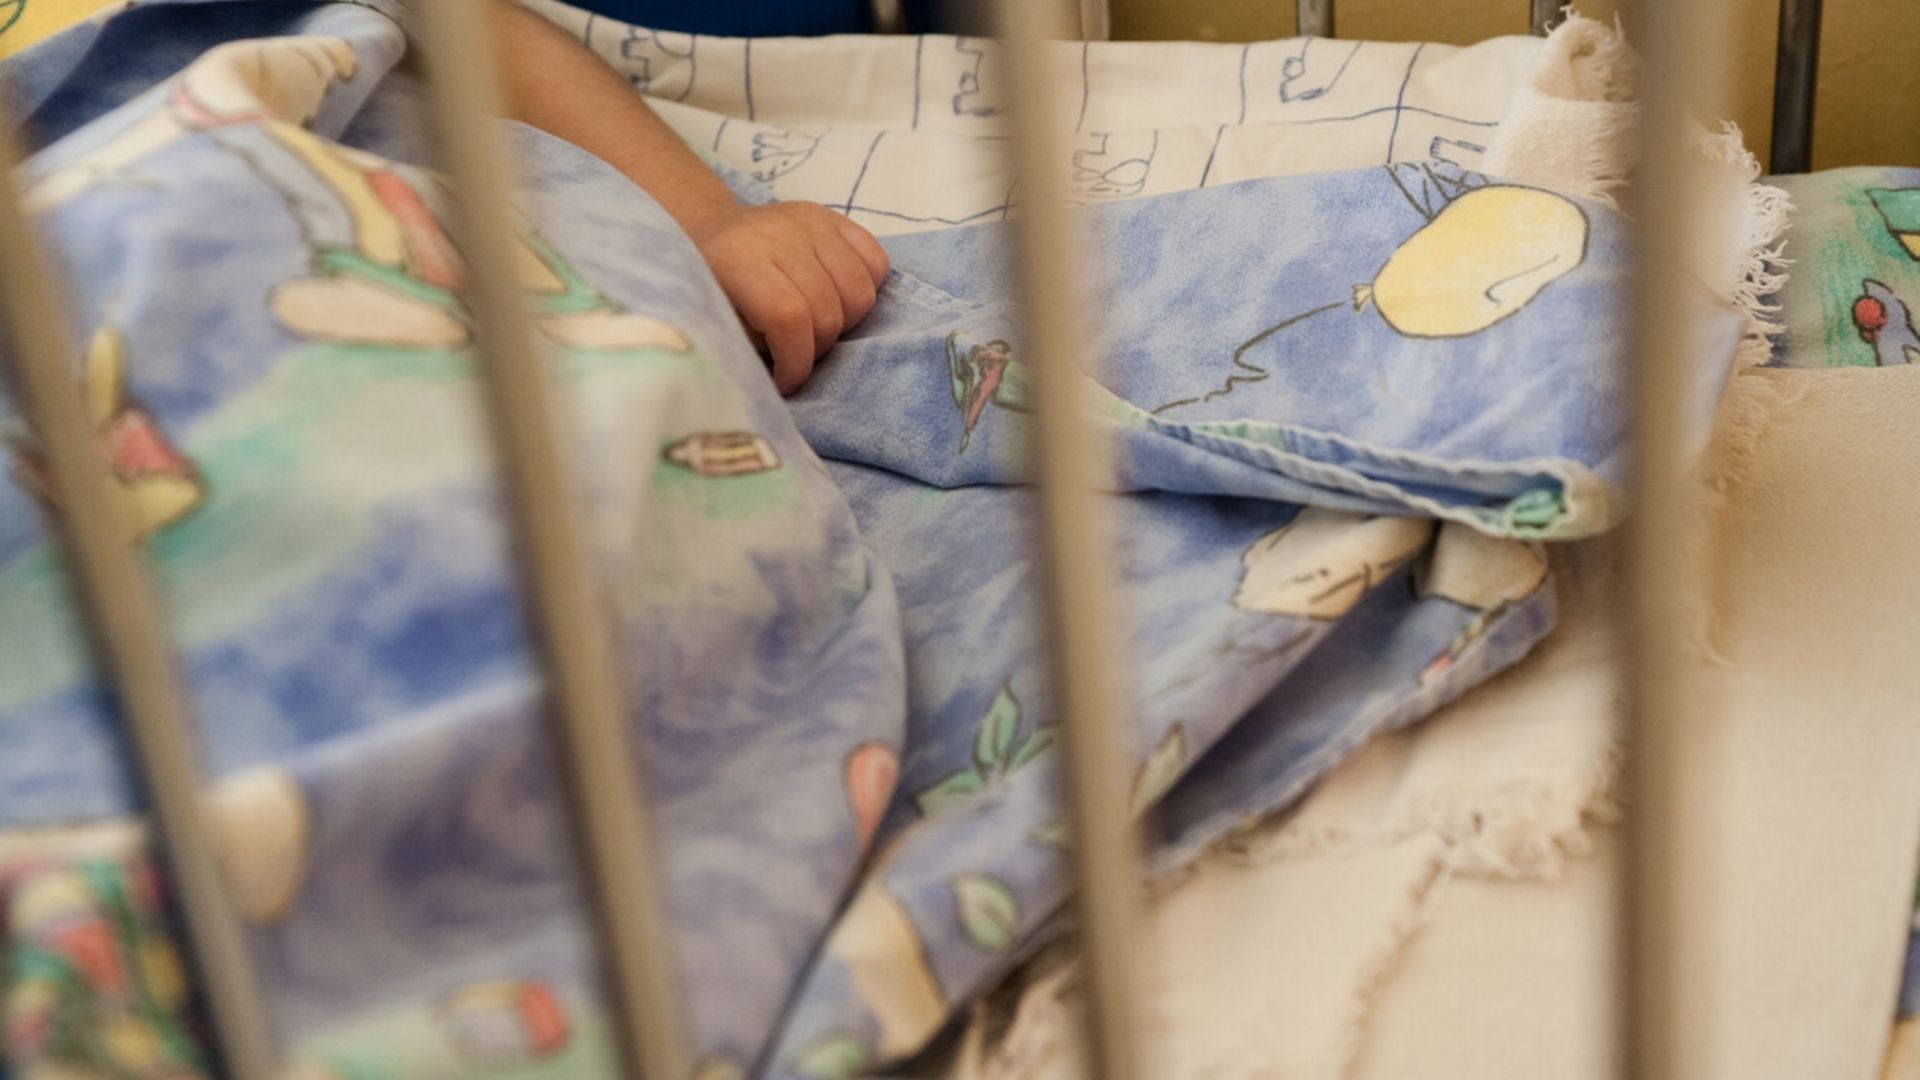 A child behind the bars of a cot in an orphanage in Bosnia